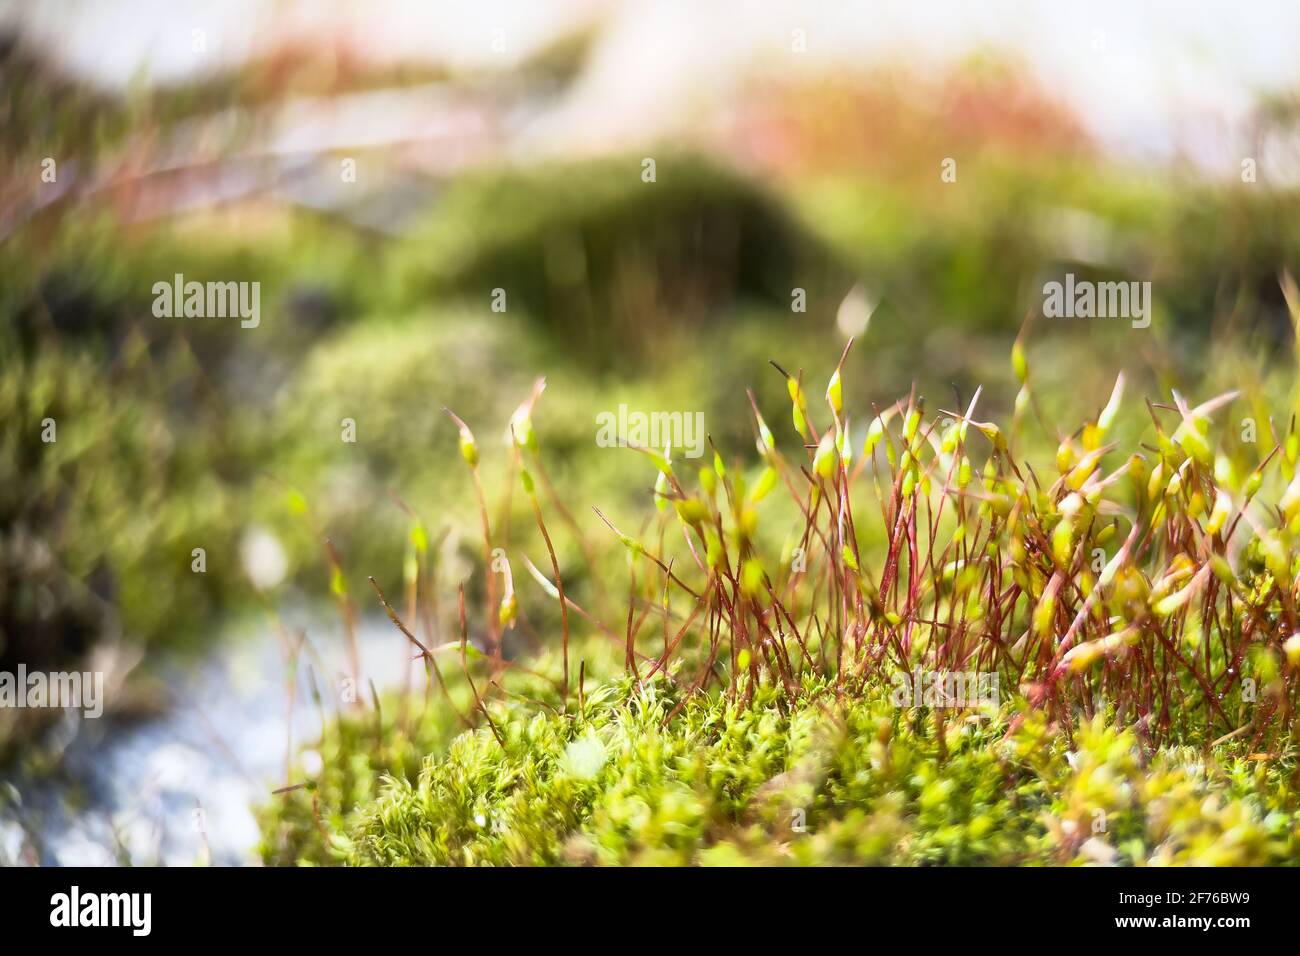 Macro shot of red stalks of moss with green spore capsules. Macro natural background. Stock Photo